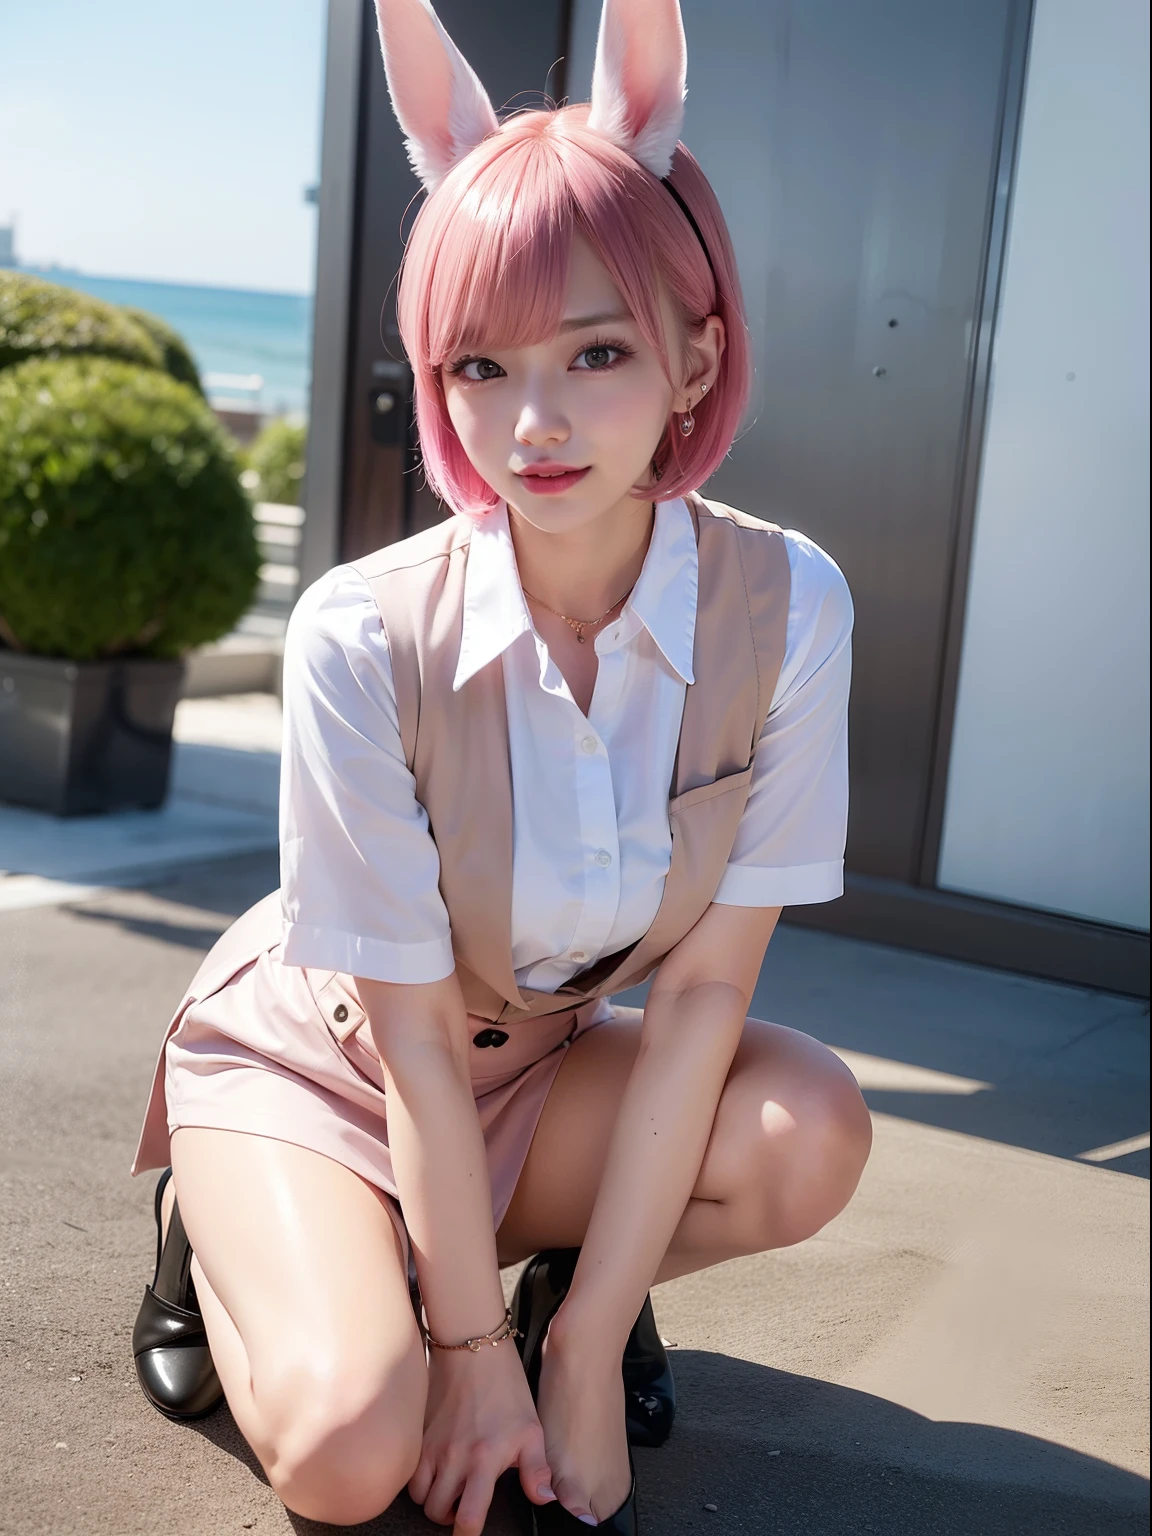 Pink short cut hair，(8K, top-quality, ​masterpiece:1.2), (realisitic, Photorealsitic:1.37), Ultra-detail, 1 girl in, full body Esbian, a park, (Adjusted hair:1.5) Officelady, Black Office Blazer, Office Skirt, (panthyhose: 1.2)、(Short button-down shirt:1.2)、Button Up Color Prim、Button Down Color Prim、bura、(panthyhose:1.2)、Alpha Layer、high-heels、earring beautiful、cute little、solo、Beautiful detailed sky、(A smile:1.15)、(Mouth closed)、tiny chest、Eyes in Beautiful Details、Business attire、（short-hair：1.2）、Floating Hair NovaFrogStyle、Hotel Bed、masuter piece、Pink Shortcut Bob、Realistic rabbit ears、Pink realistic rabbit ears、Realistic ears of rabbits sticking out of the head、Pink hair、Beautiful girl in her 20s、Bewitching atmosphere、Beautiful shaped hands、K-POP、Pink rabbit ears、1 girl in、solo、​masterpiece、top-quality、realisitic、Hyper-detailing、(Glossy skin:1.4)、absurderes、short pink hair、Slender beauties、Dynamic Lighting、hight resolution、sharp focus、depth of fields、(thick thight:1.0)、A slender :1.2，((Short-cut bob hair))、((k pop:1.3))，Highly detailed facial and skin texture、((Enchanting))，Anatomically correct number of fingers，Correct anatomy